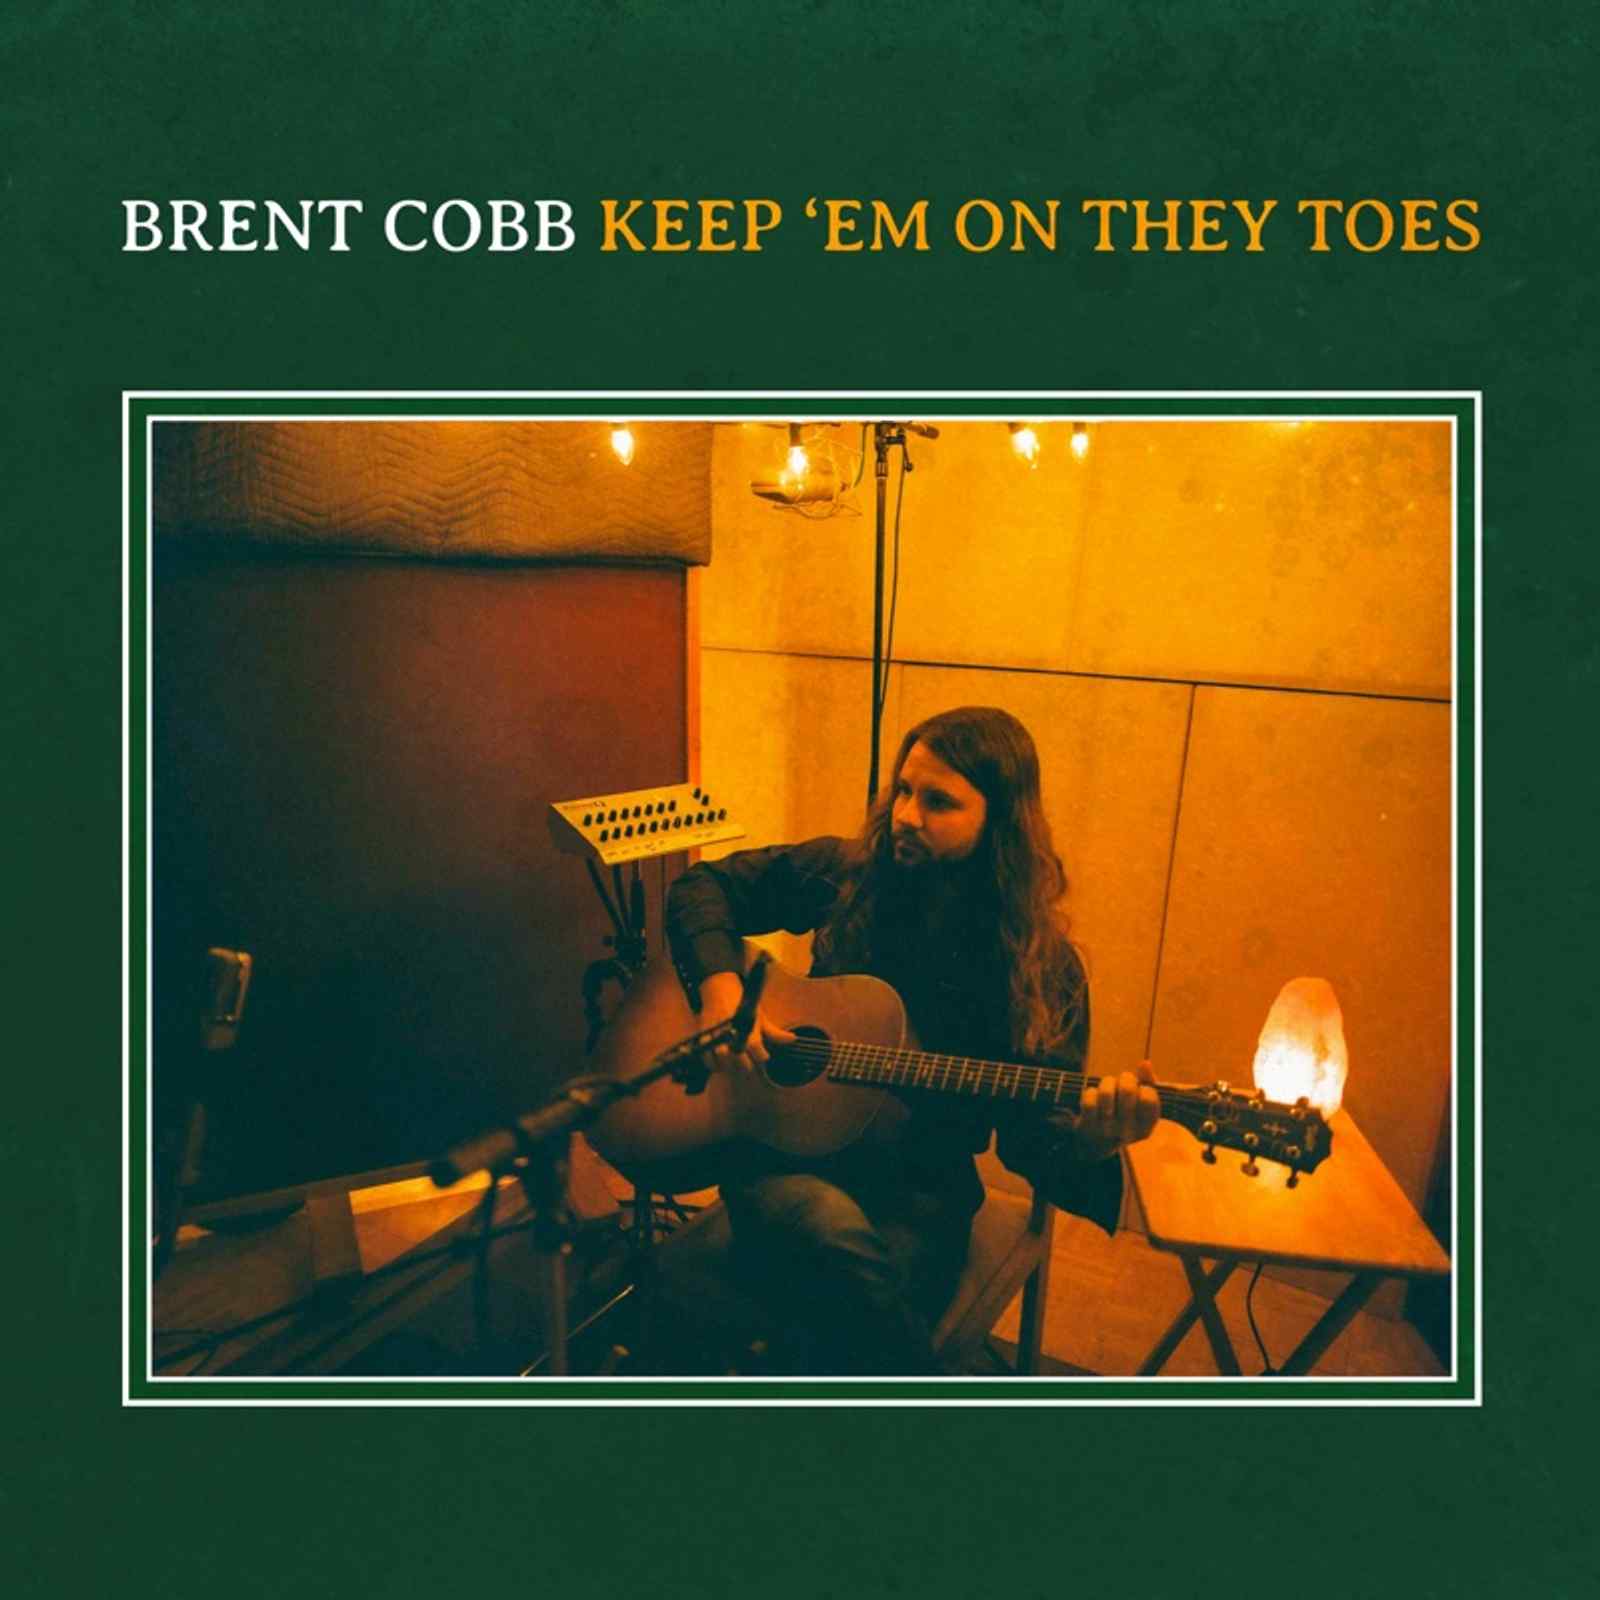 Keep 'Em On They Toes by Brent Cobb